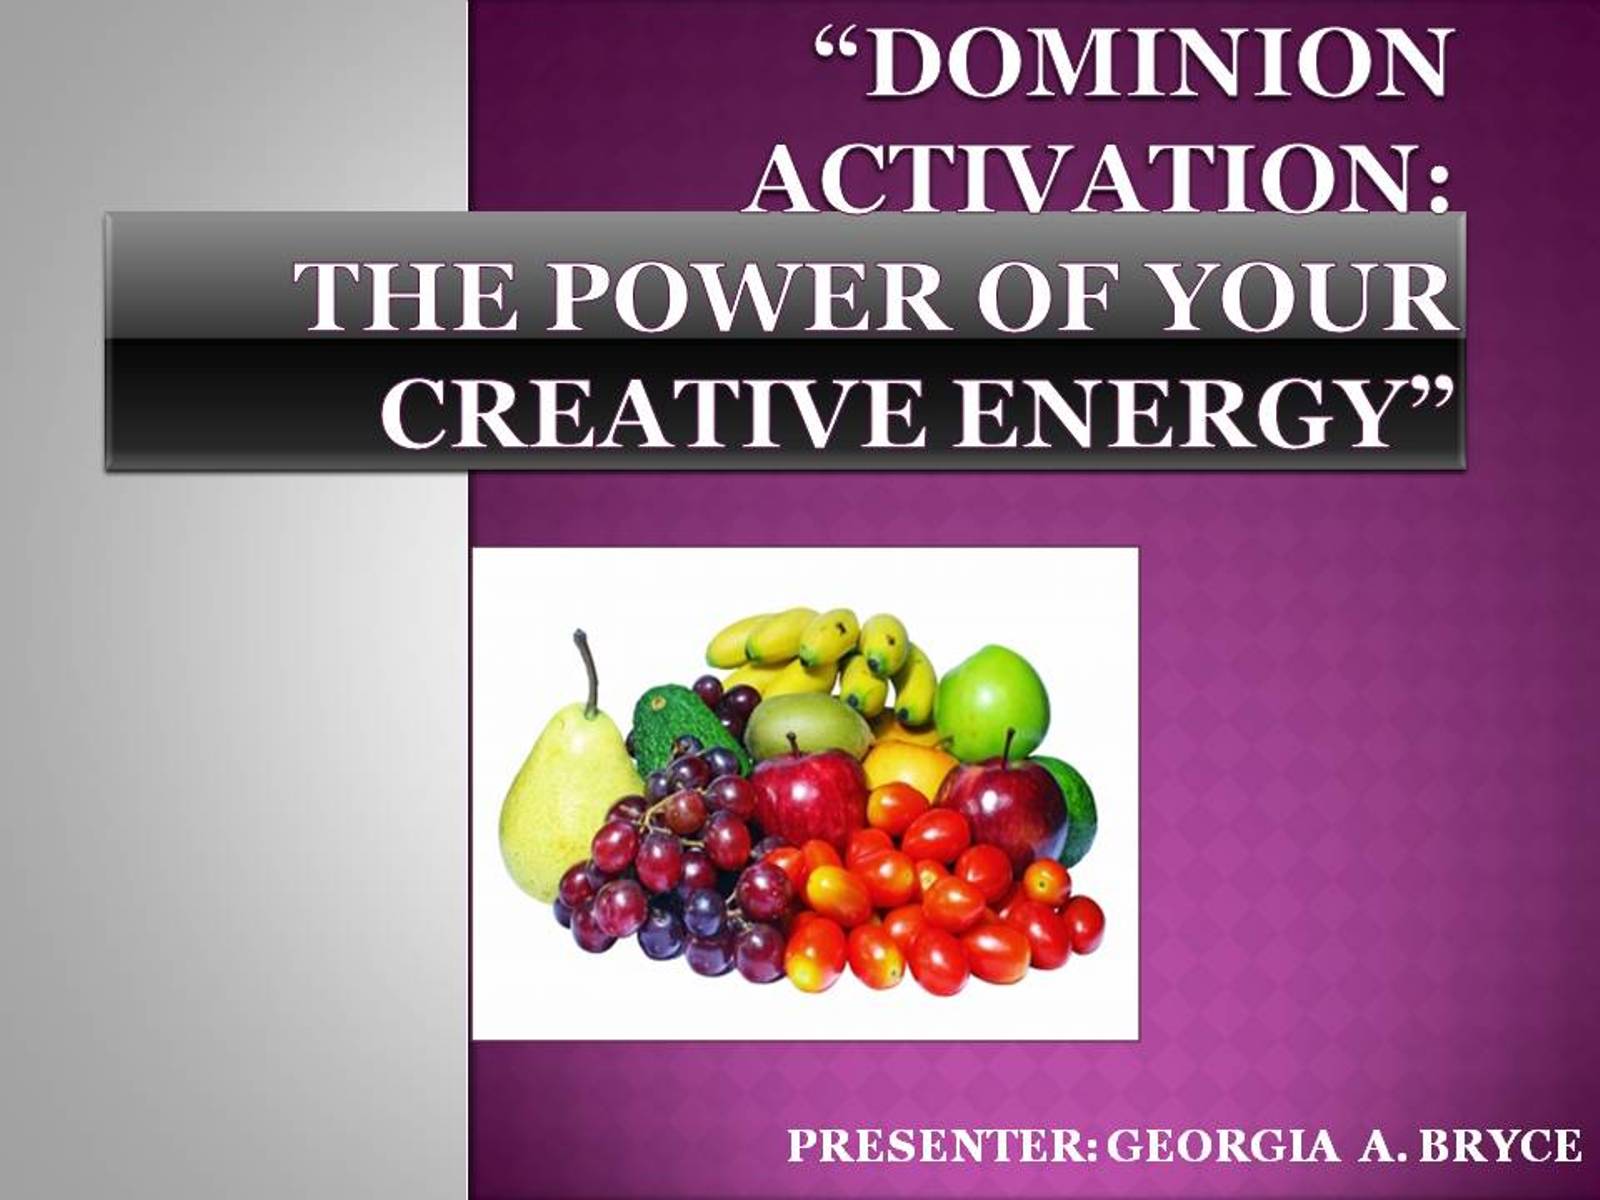 DOMINION ACTIVATION: THE POWER OF YOUR CREATIVE ENERGY